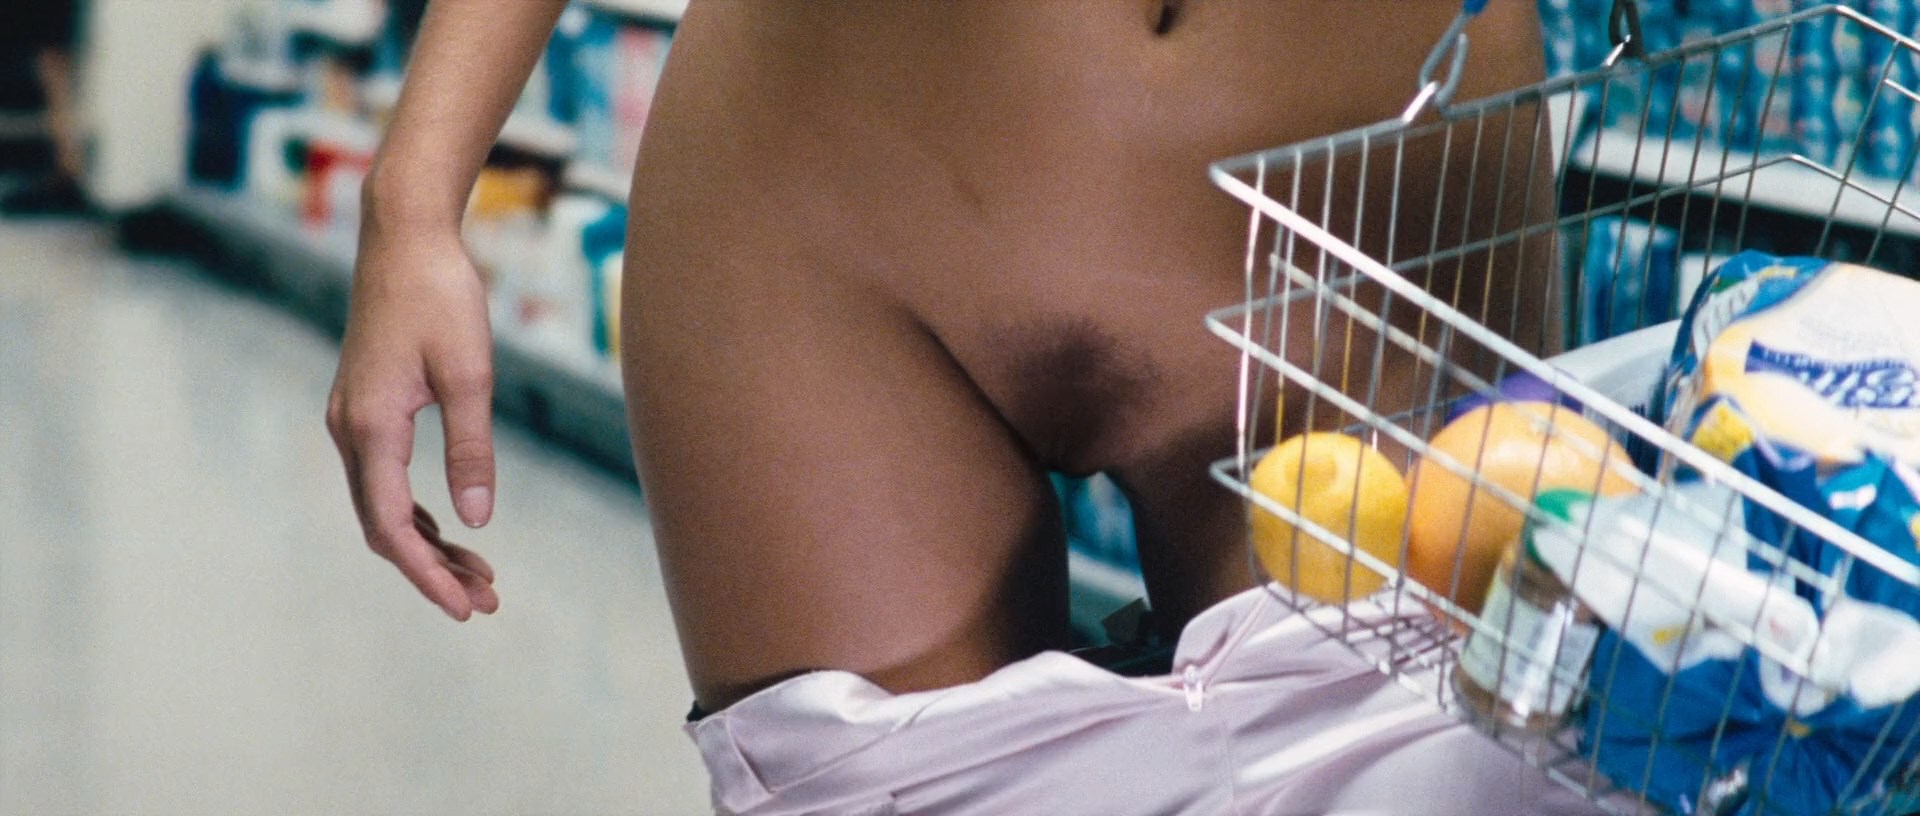 Nude chicks in movies